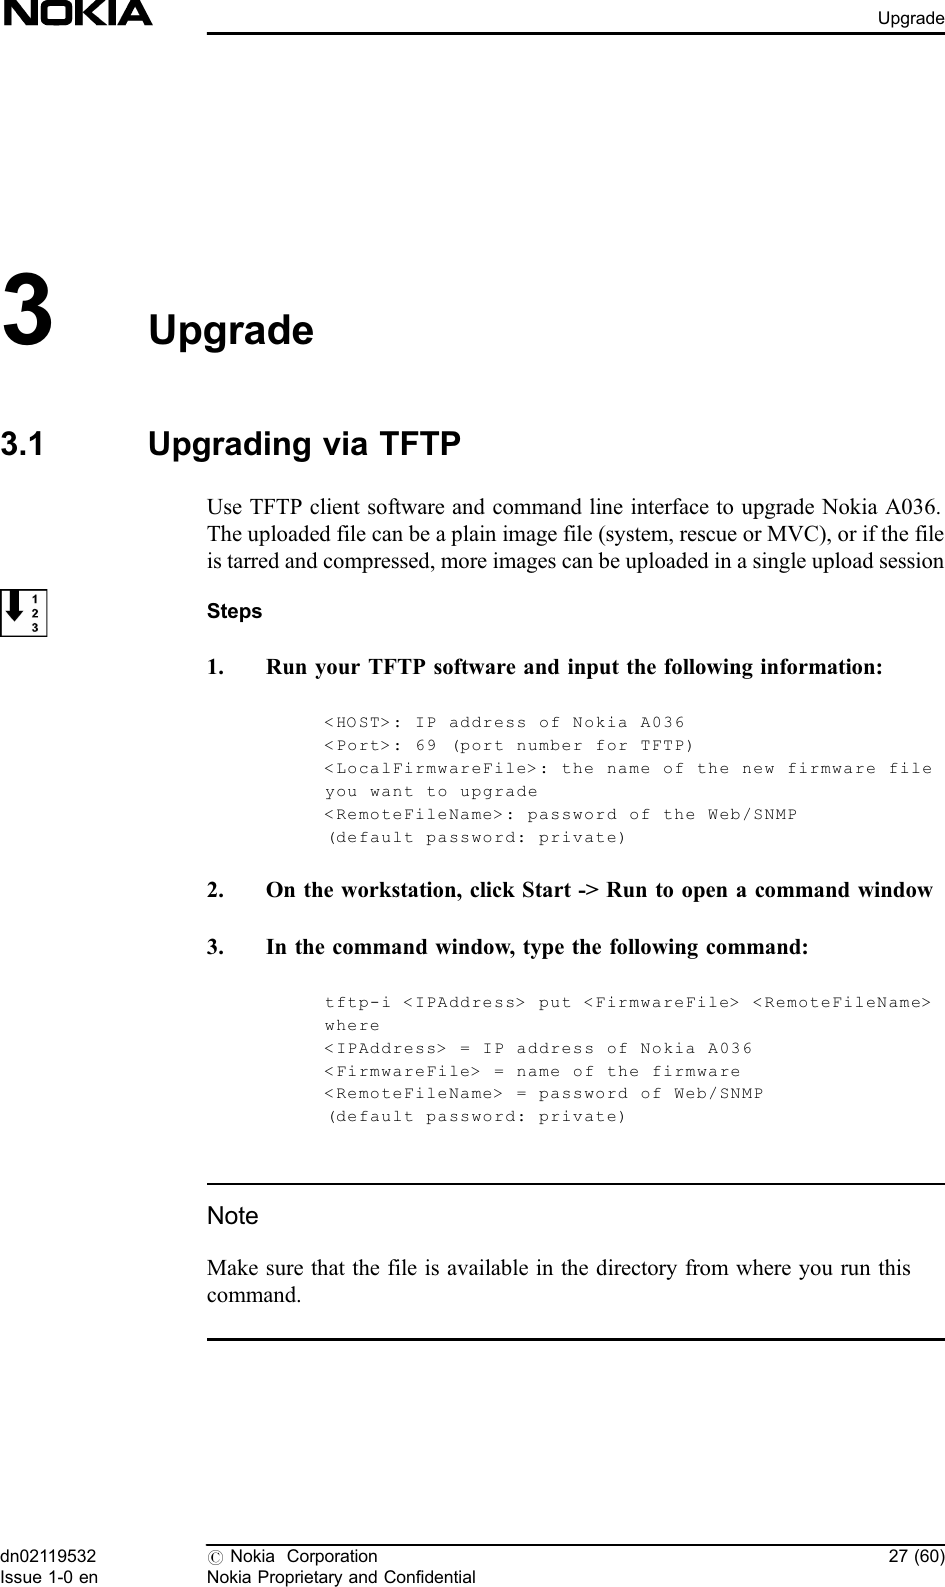 3Upgrade3.1 Upgrading via TFTPUse TFTP client software and command line interface to upgrade Nokia A036.The uploaded file can be a plain image file (system, rescue or MVC), or if the fileis tarred and compressed, more images can be uploaded in a single upload sessionSteps1. Run your TFTP software and input the following information:&lt;HOST&gt;: IP address of Nokia A036&lt;Port&gt;: 69 (port number for TFTP)&lt;LocalFirmwareFile&gt;: the name of the new firmware fileyou want to upgrade&lt;RemoteFileName&gt;: password of the Web/SNMP(default passwo r d: private)2. On the workstation, click Start -&gt; Run to open a command window3. In the command window, type the following command:tftp-i &lt;IPAddress&gt; put &lt;FirmwareFile&gt; &lt;RemoteFileName&gt;where&lt;IPAddress&gt; = IP address of Nokia A036&lt;FirmwareFile&gt; = name of the firmware&lt;RemoteFileName&gt; = password of Web/SNMP(default passwo r d: private)NoteMake sure that the file is available in the directory from where you run thiscommand.dn02119532Issue 1-0 en#Nokia CorporationNokia Proprietary and Confidential27 (60)Upgrade